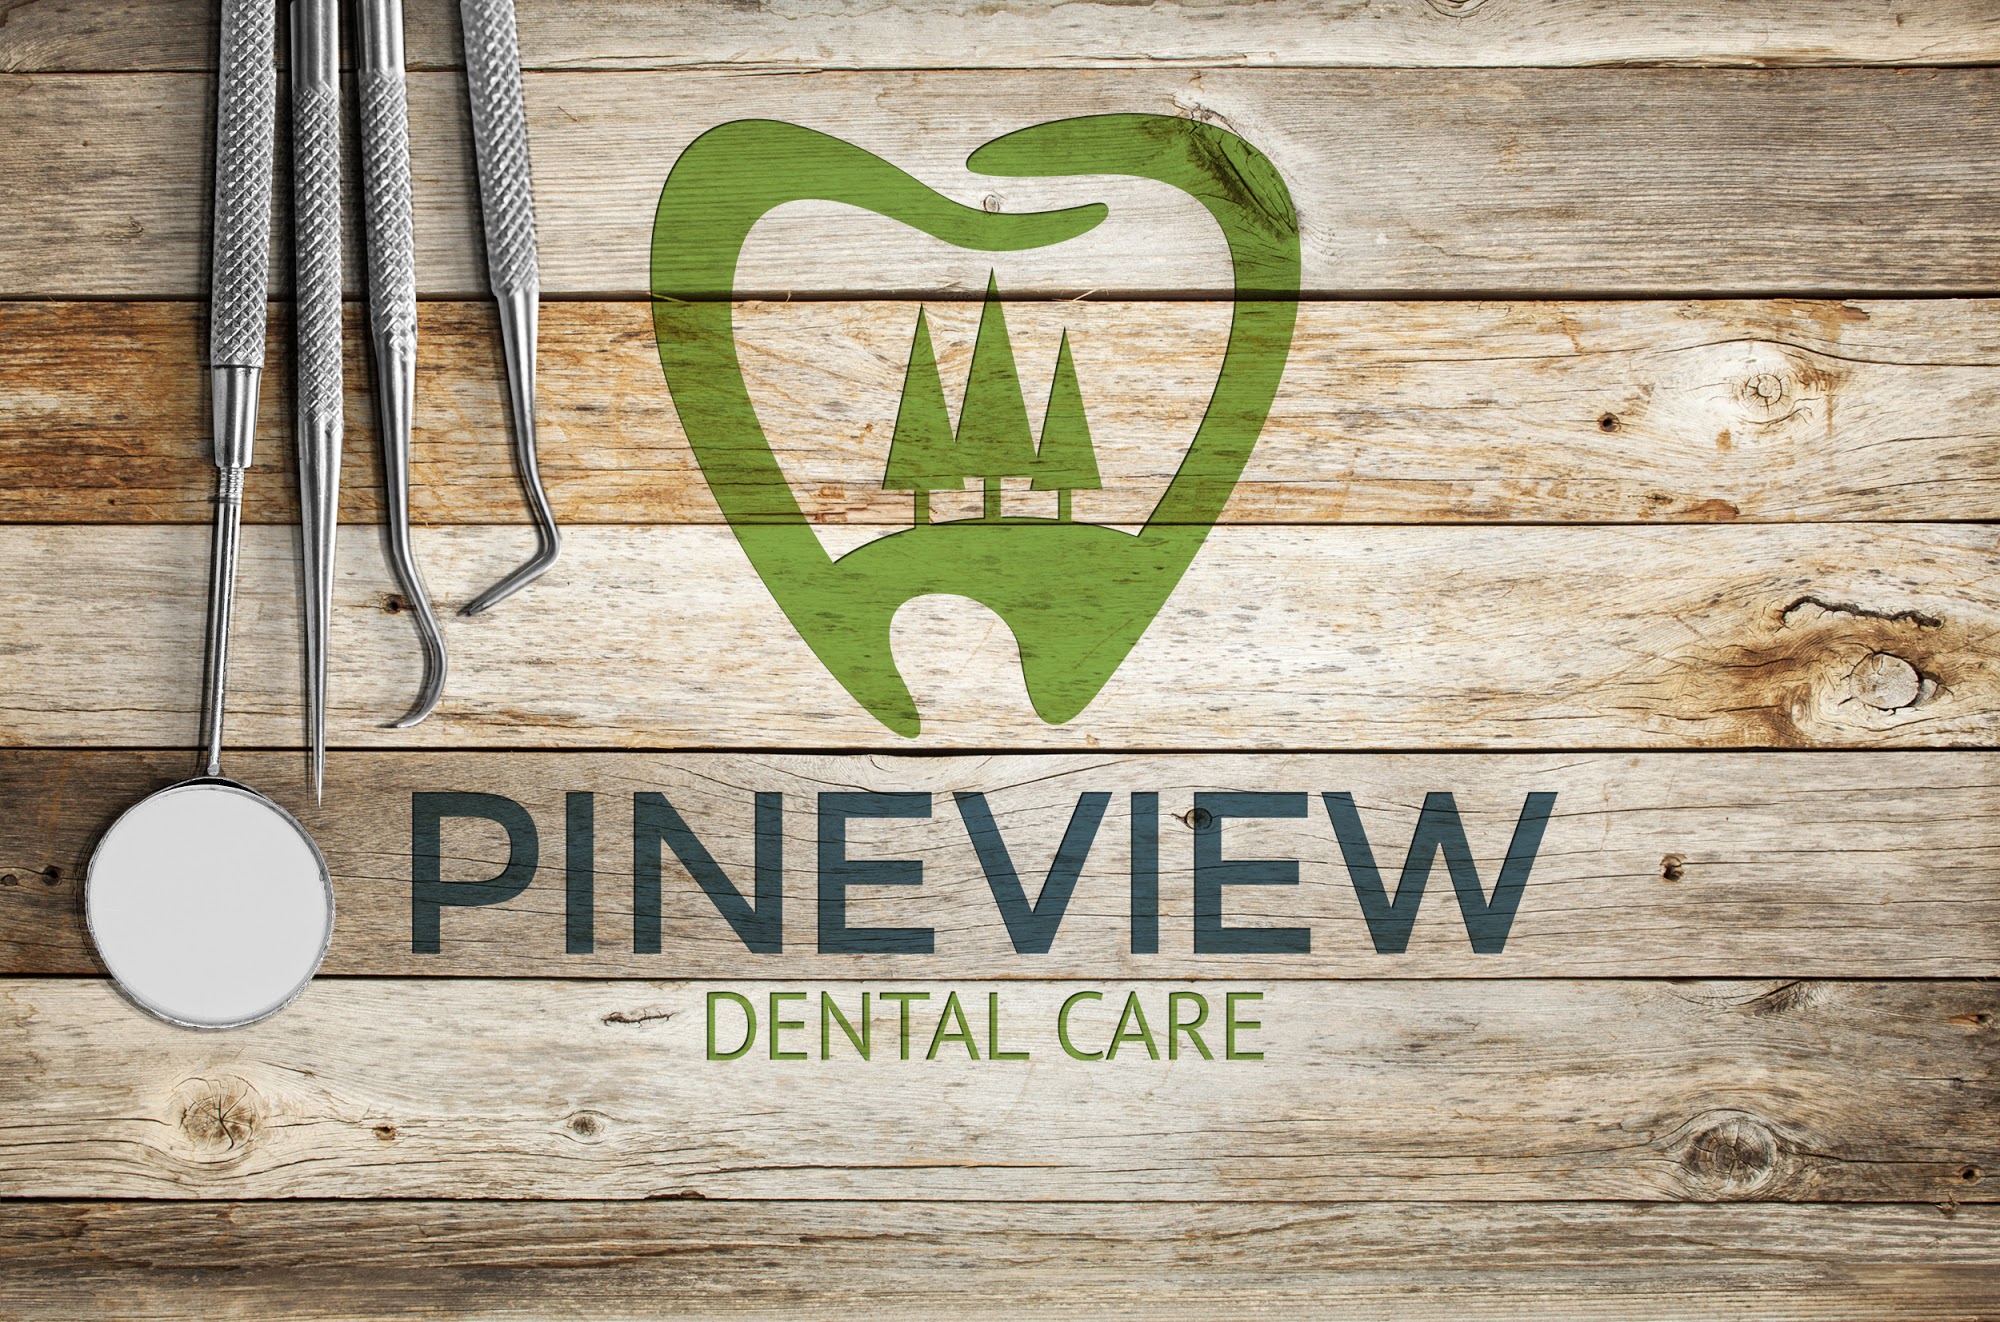 Pineview Dental Care: Dr. Adam J. Myers, DDS